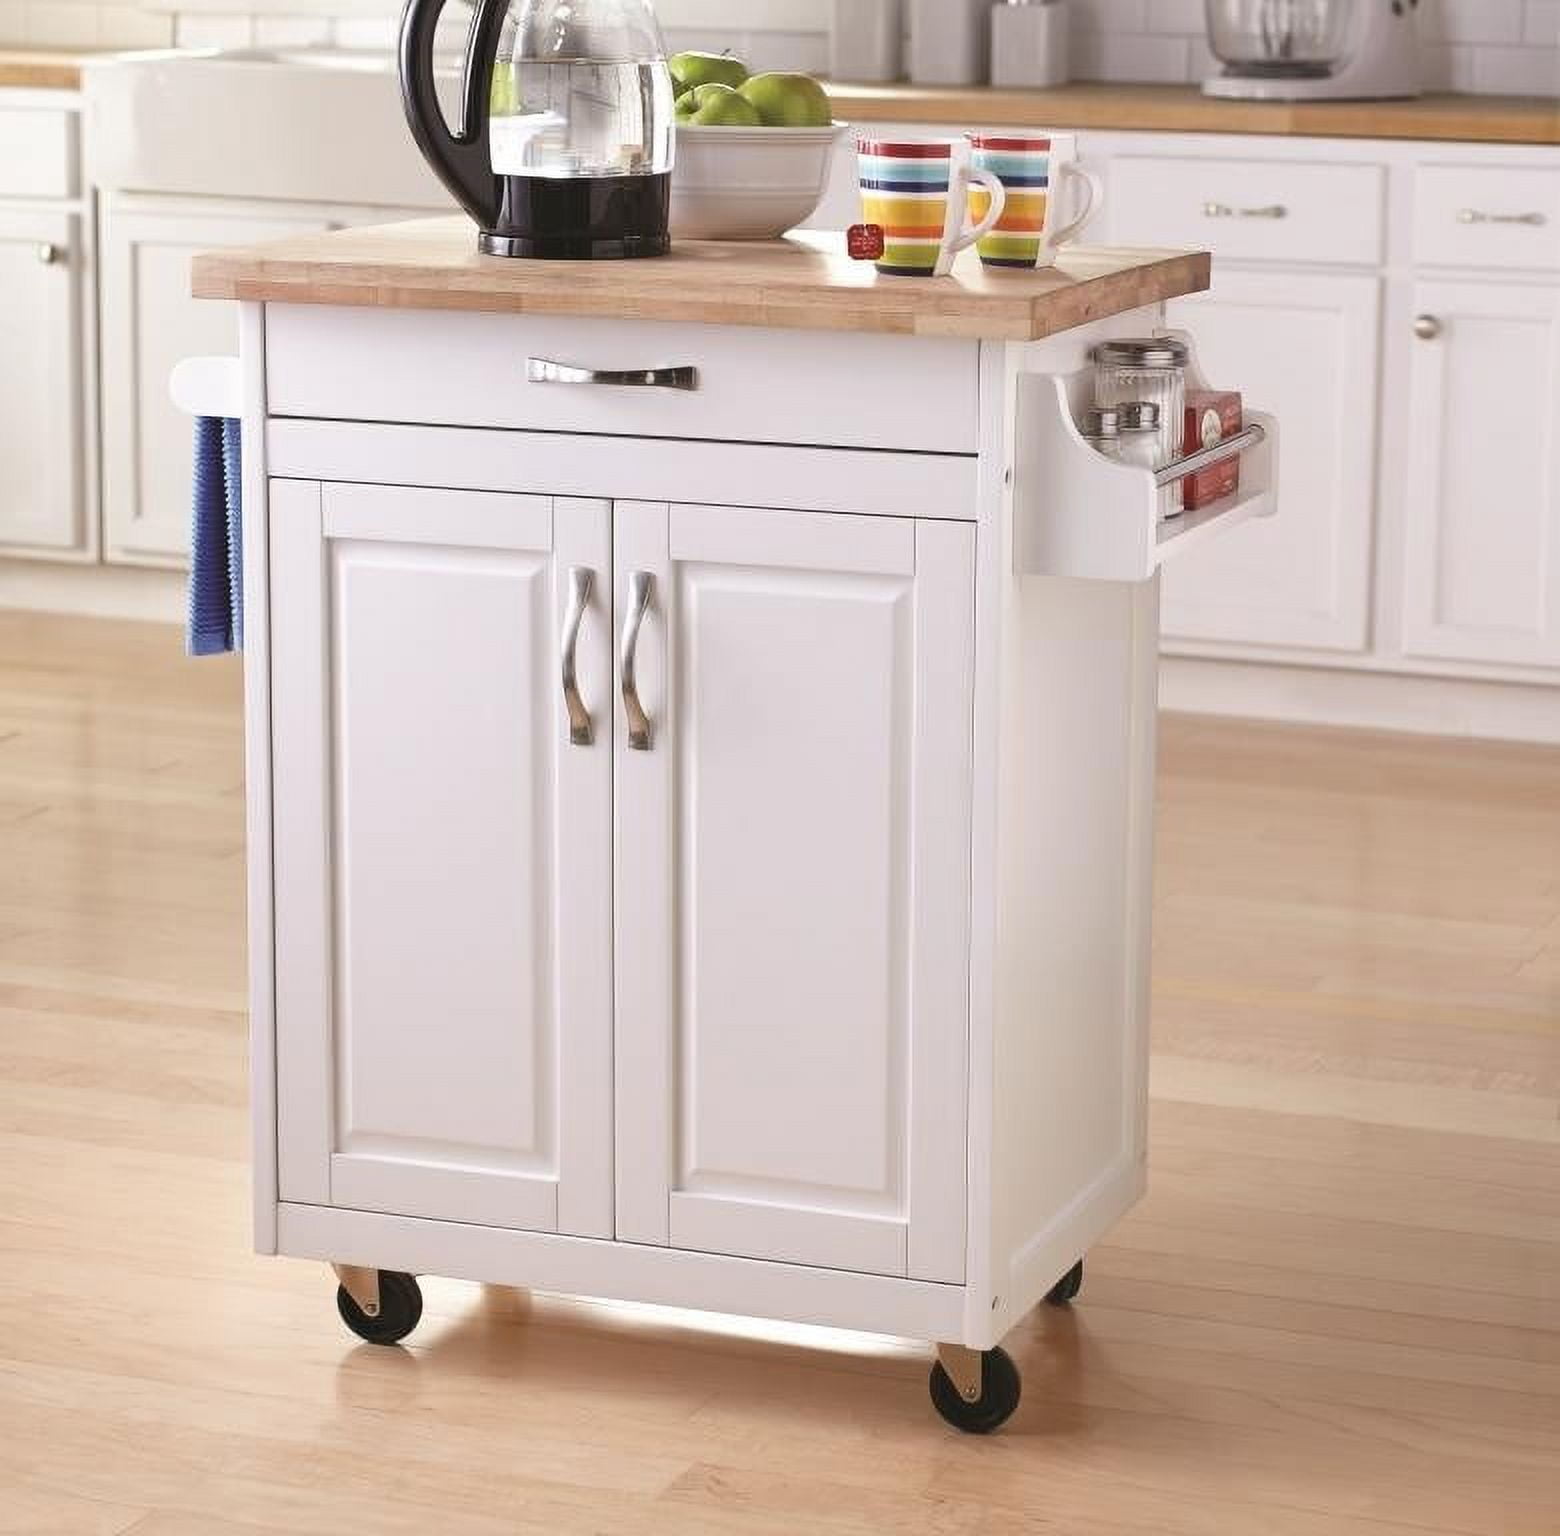 Mainstays Kitchen Island Cart with Drawer and Storage Shelves, White 